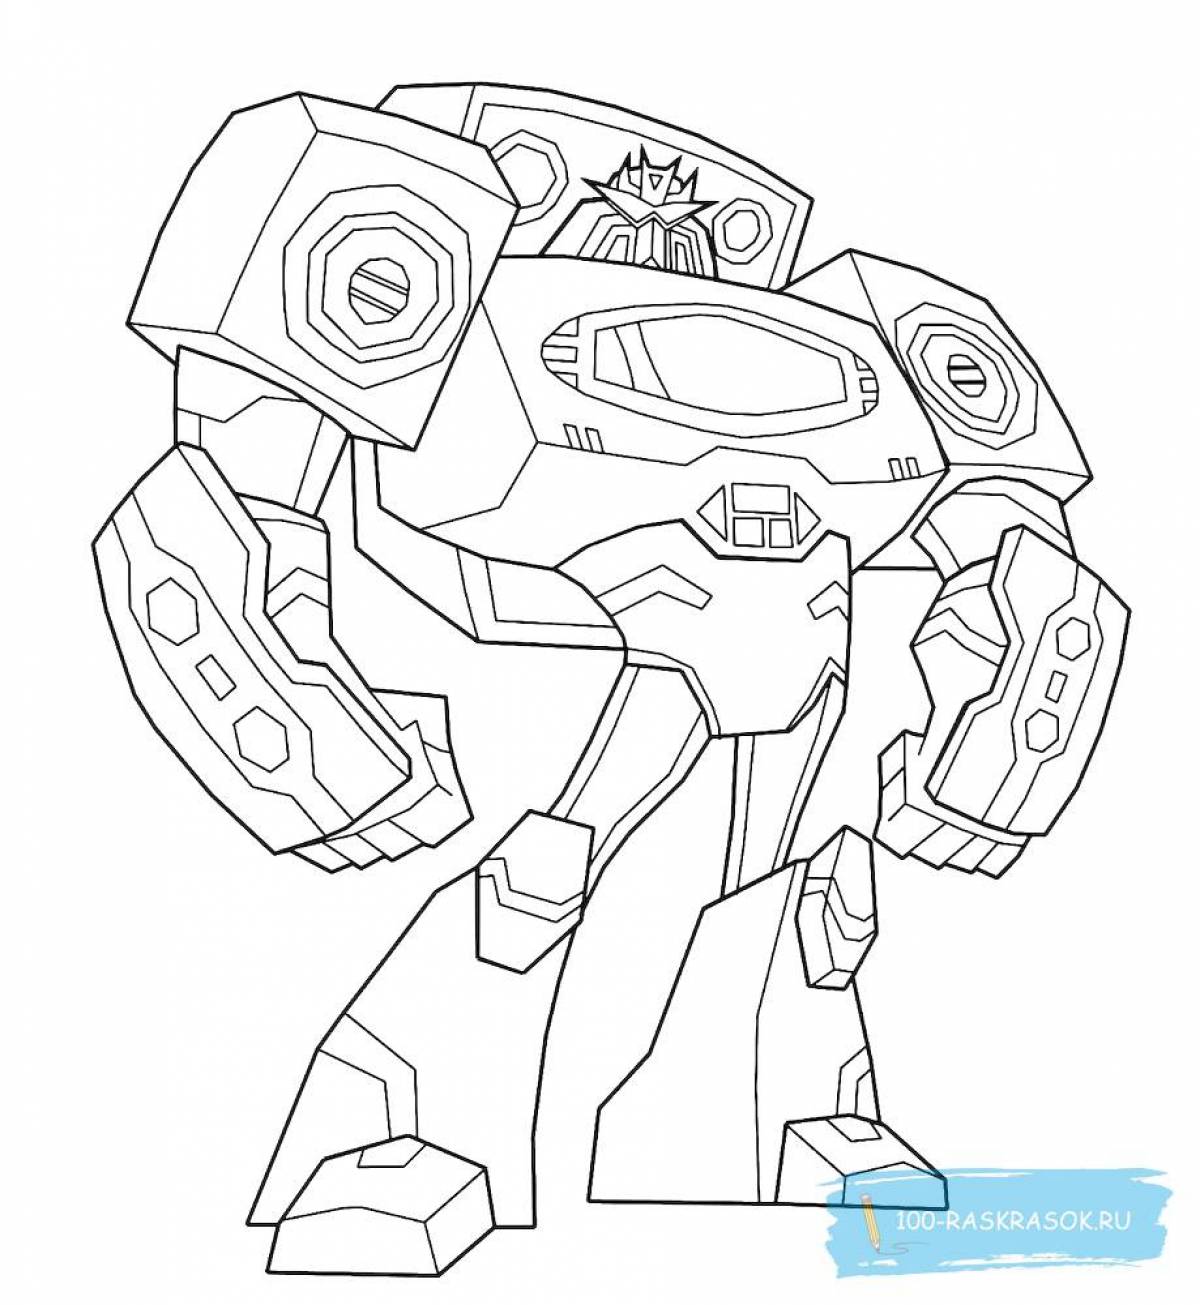 Amazing transformers coloring pages for kids